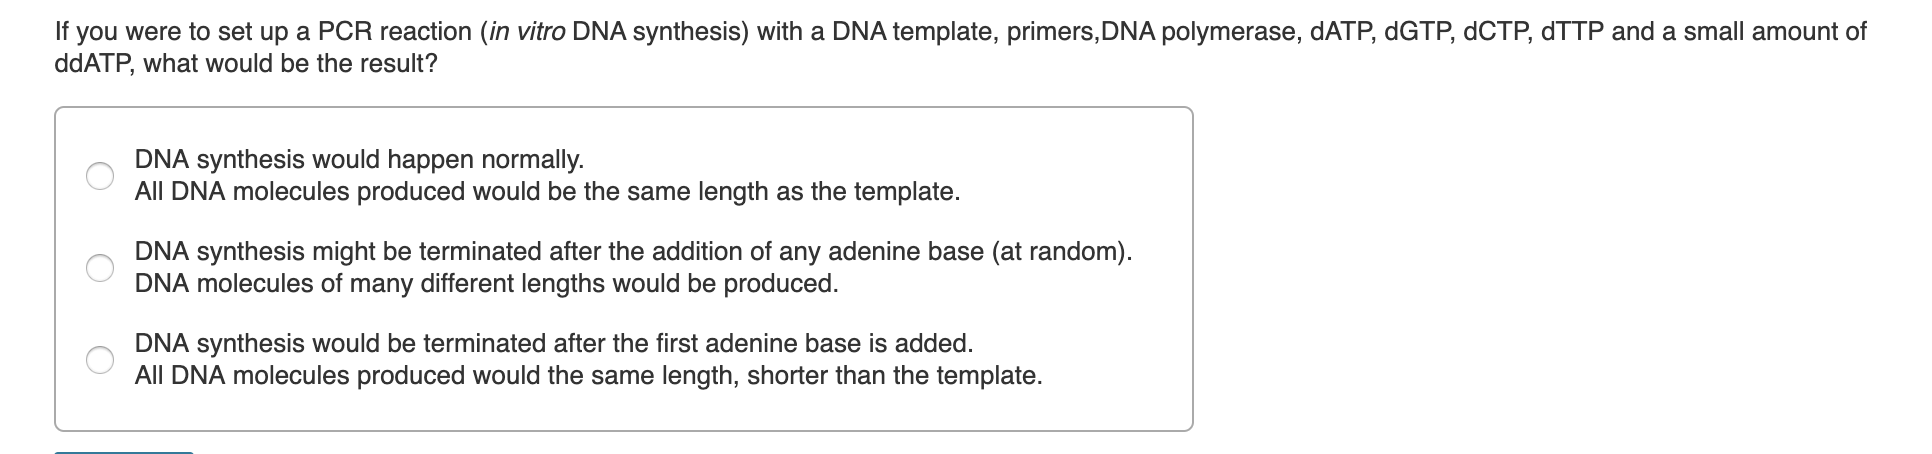 If you were to set up a PCR reaction (in vitro DNA synthesis) with a DNA template, primers,DNA polymerase, DATP, dGTP, dCTP, dTTP and a small amount of
ddATP, what would be the result?
DNA synthesis would happen normally.
All DNA molecules produced would be the same length as the template.
DNA synthesis might be terminated after the addition of any adenine base (at random).
DNA molecules of many different lengths would be produced.
DNA synthesis would be terminated after the first adenine base is added.
All DNA molecules produced would the same length, shorter than the template.
